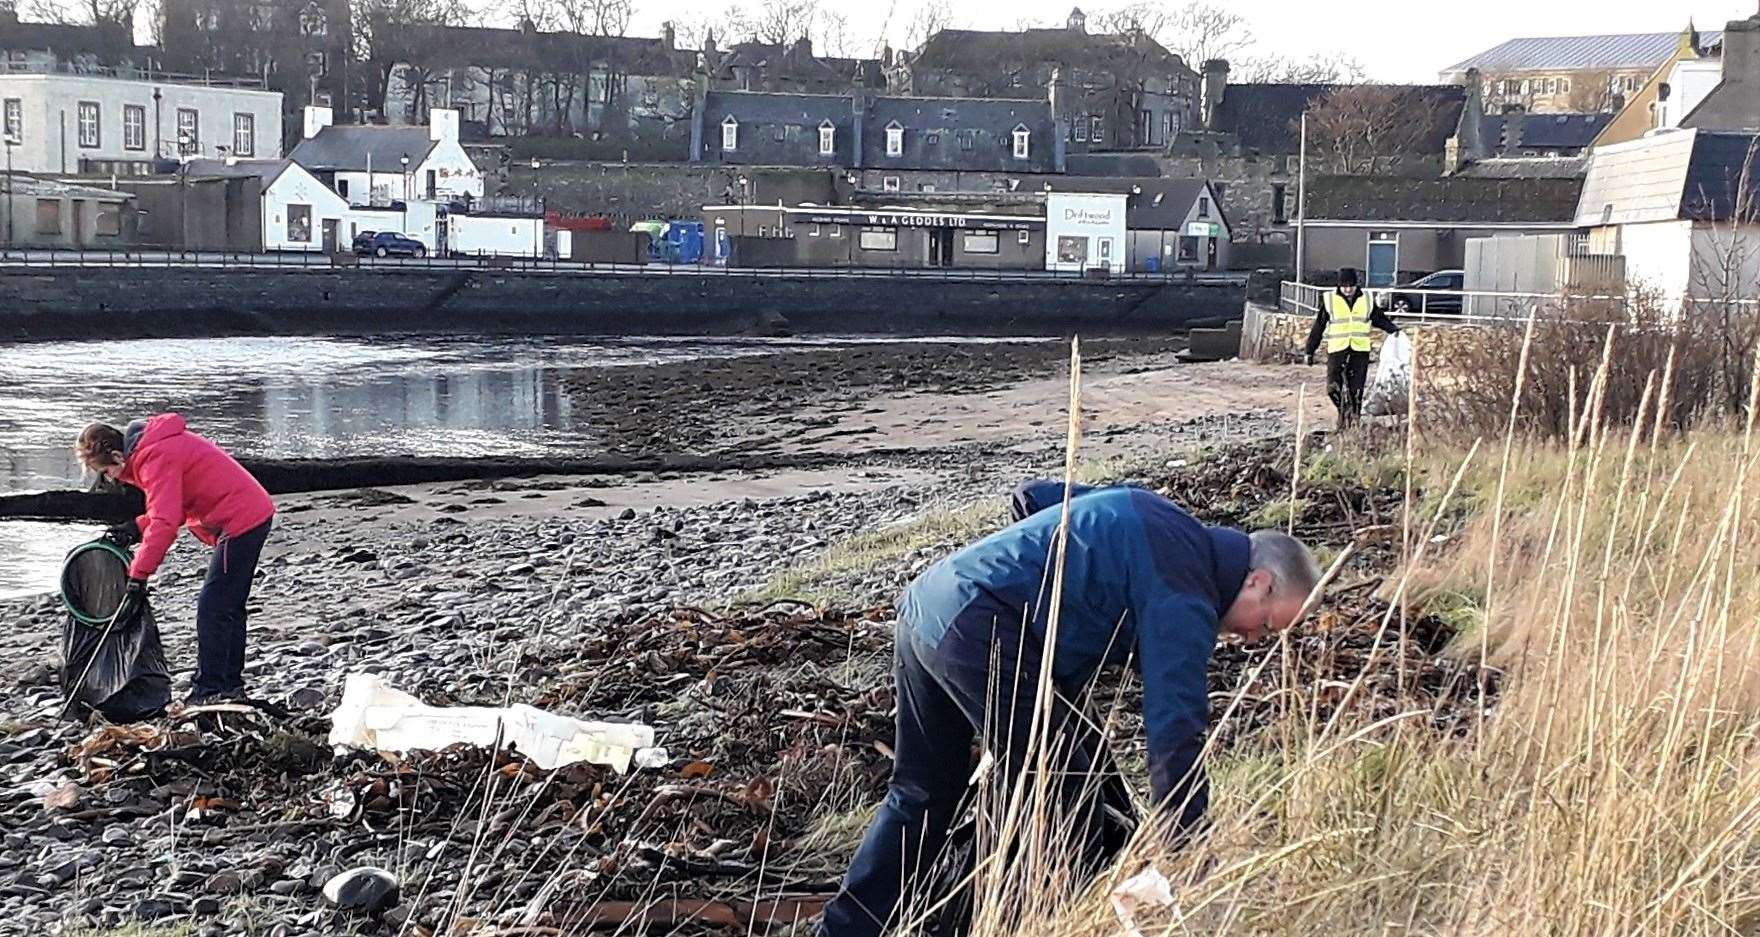 Wick Paths Group volunteers working away to clear away rubbish left after last week's storm.